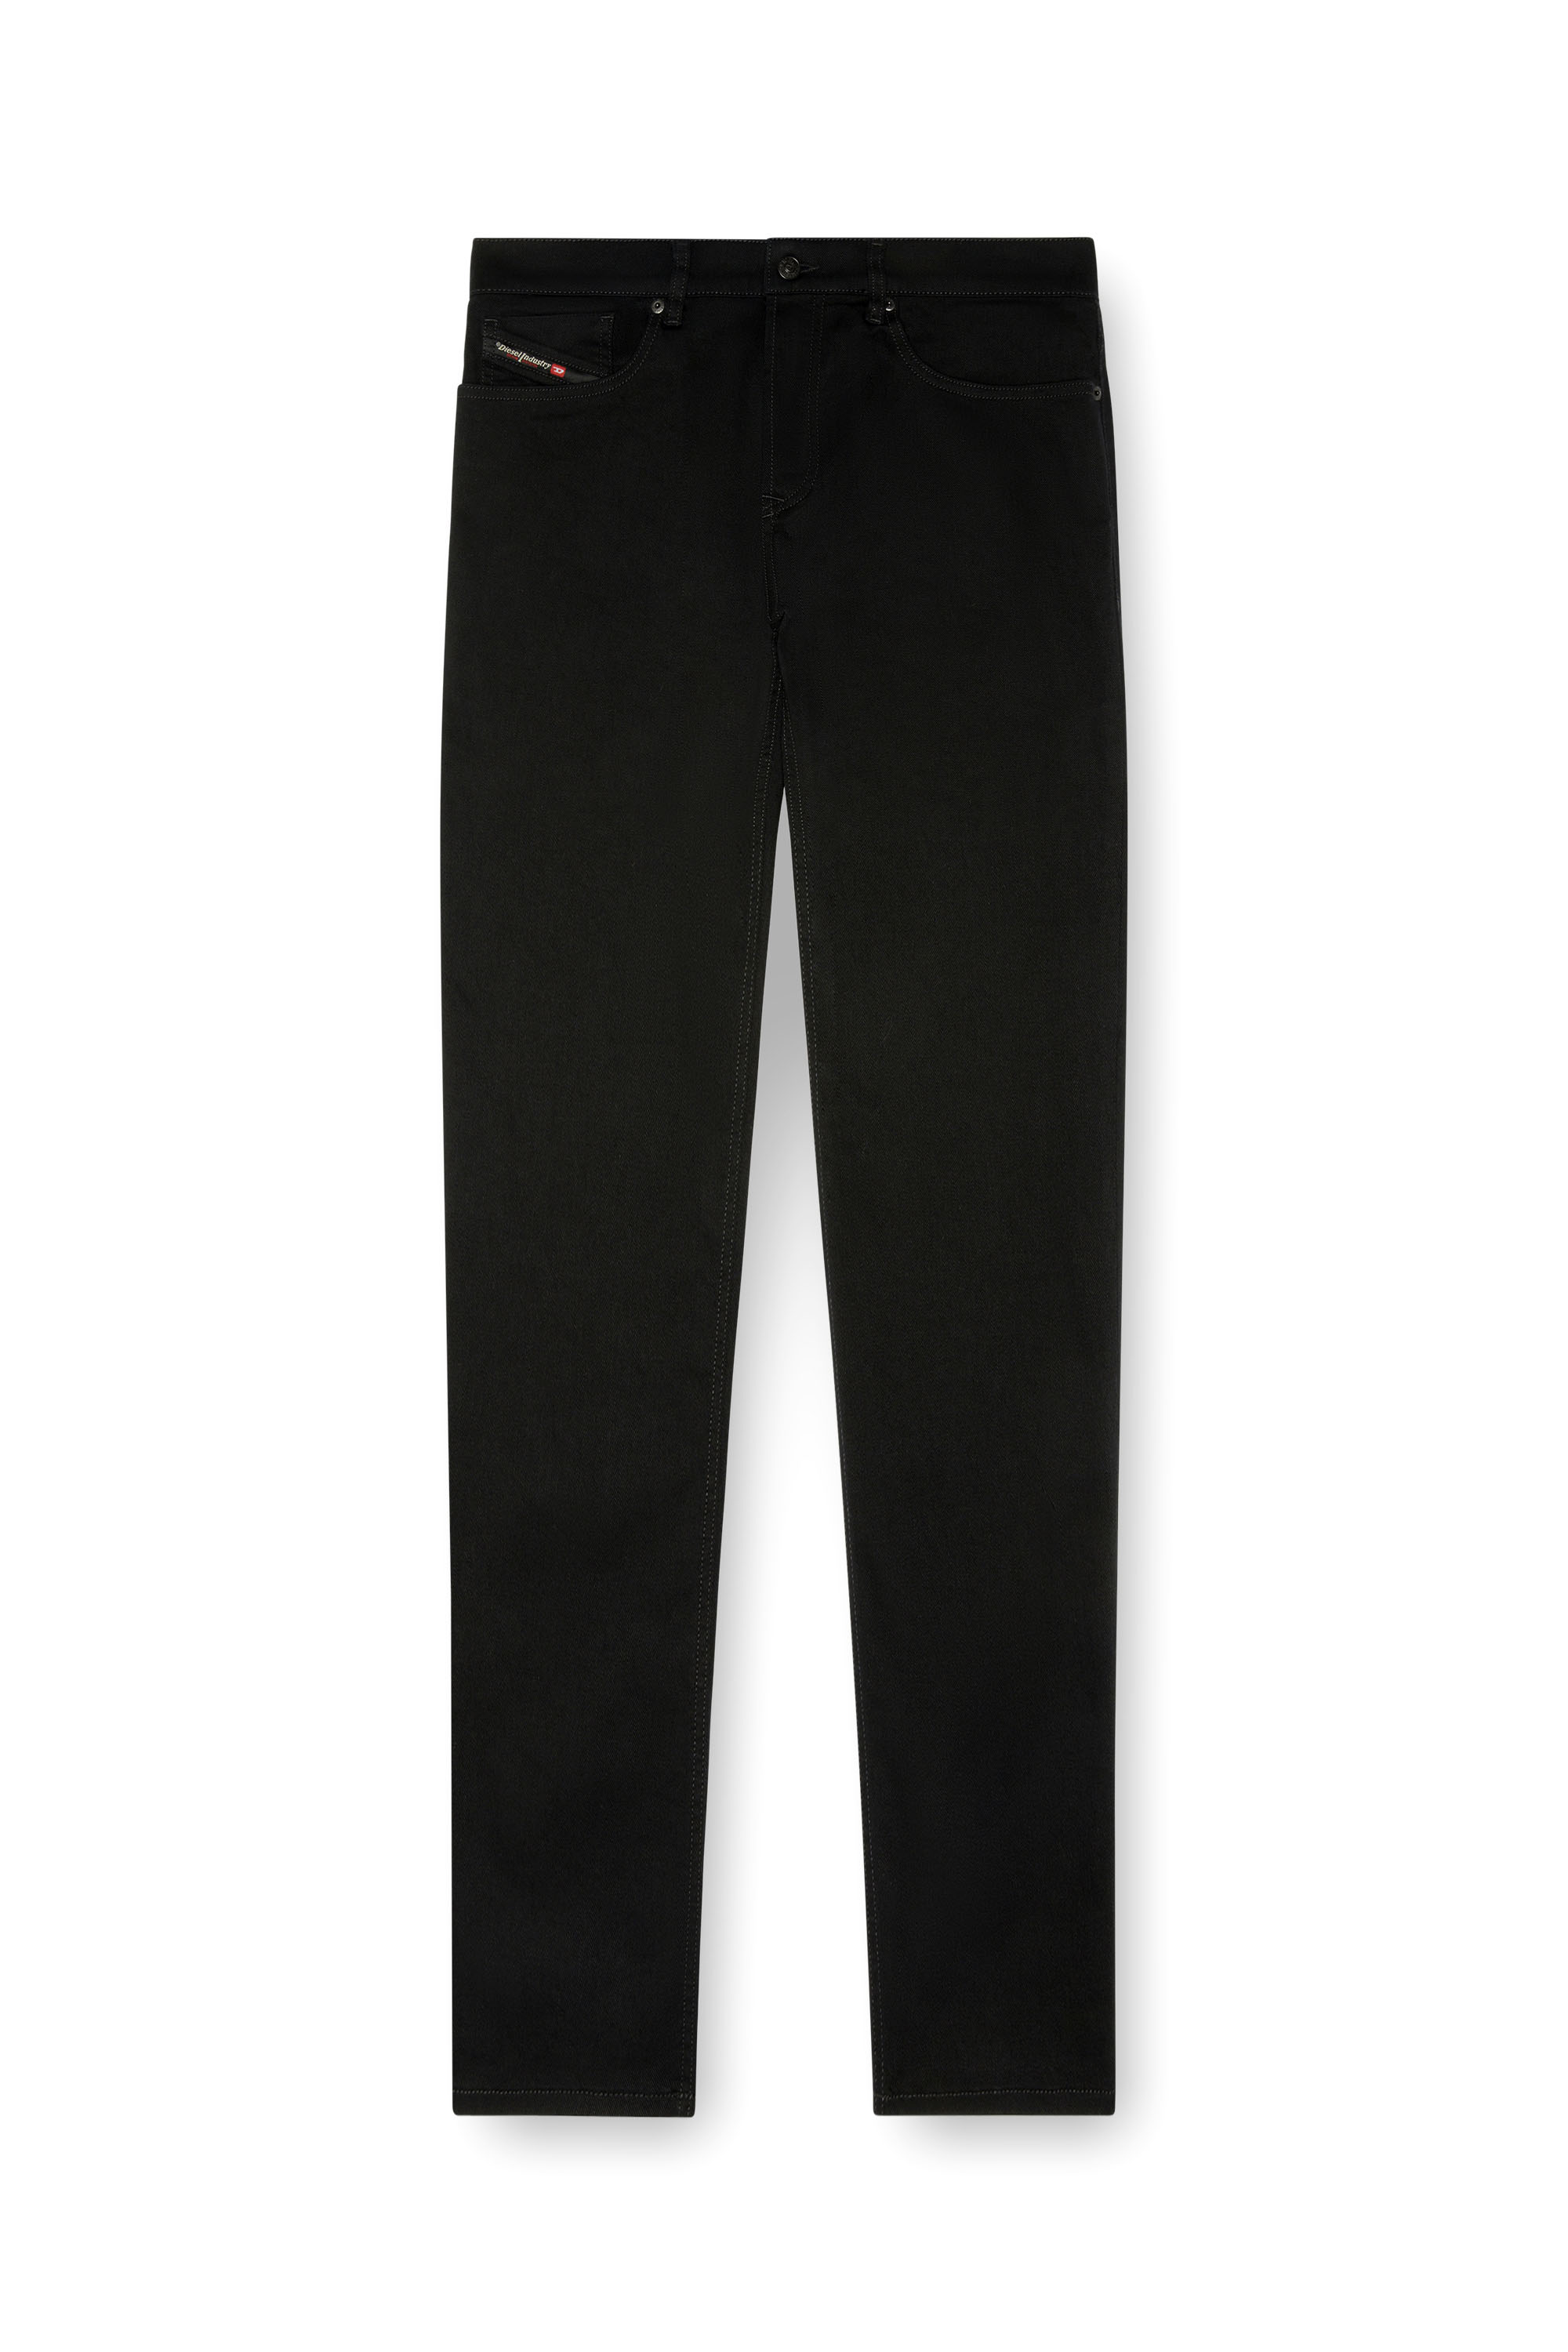 Diesel - Tapered Jeans 2023 D-Finitive 069YP, Hombre Tapered Jeans - 2023 D-Finitive in Negro - Image 3